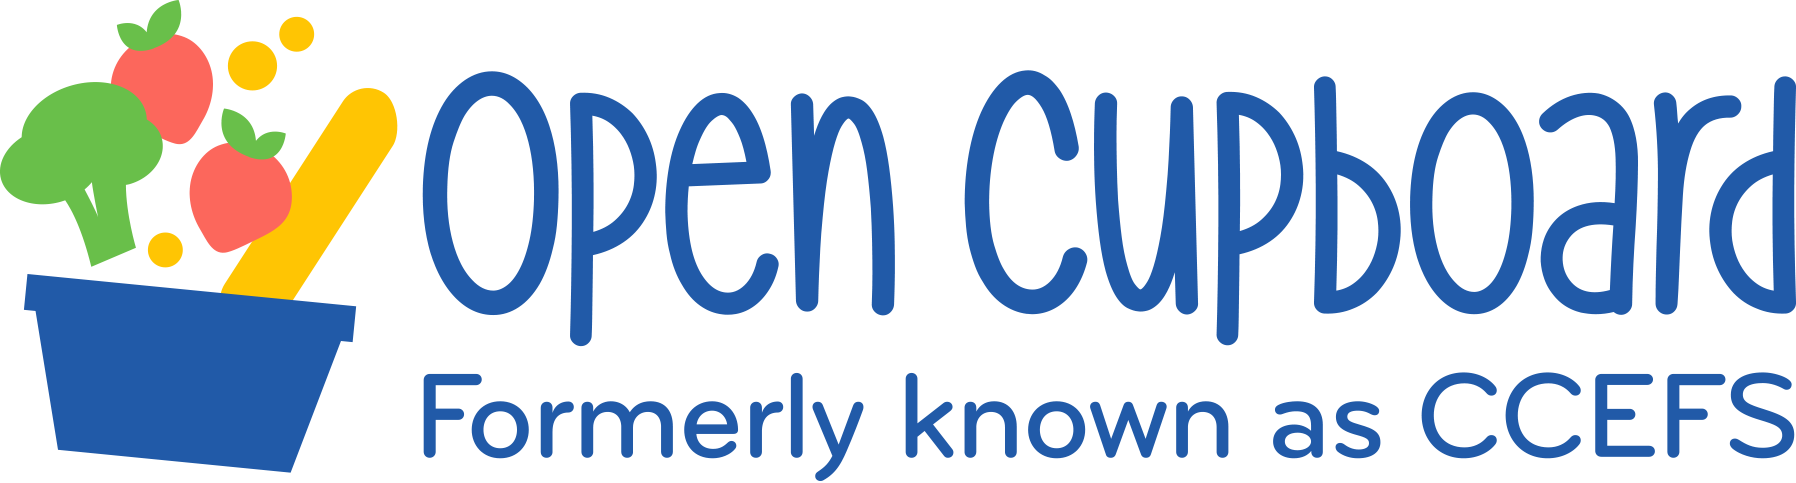 Open Cupboard Logo. A blue basket with a green broccoli, two red strawberries, three yellow circles and a yellow bread. Open Cupboard is in dark blue font